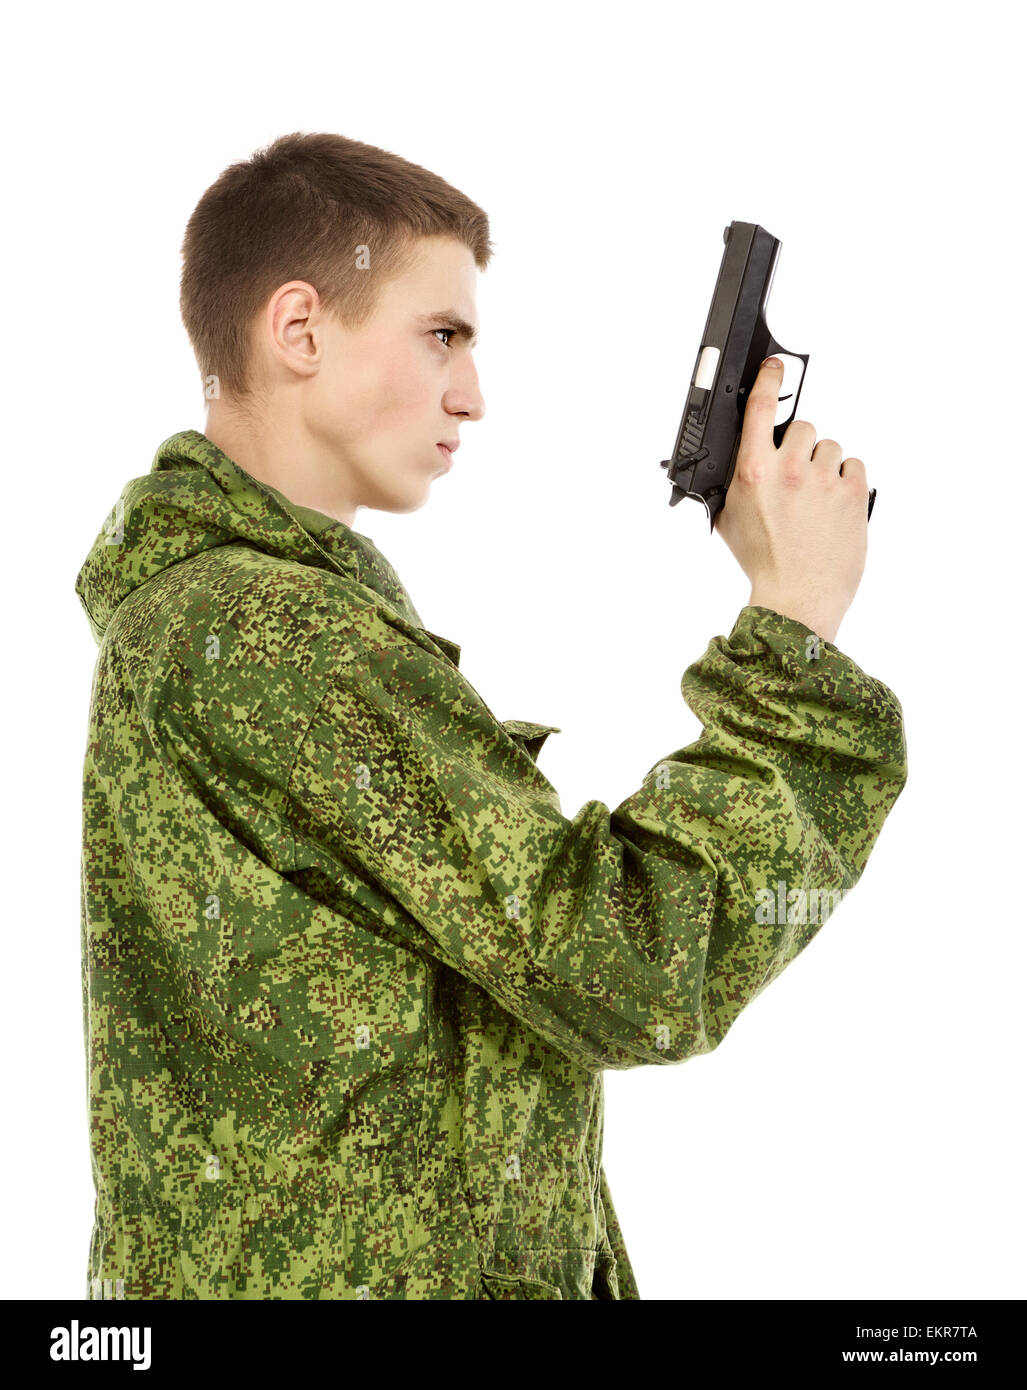 young military man with gun, isolated on white Stock Photo